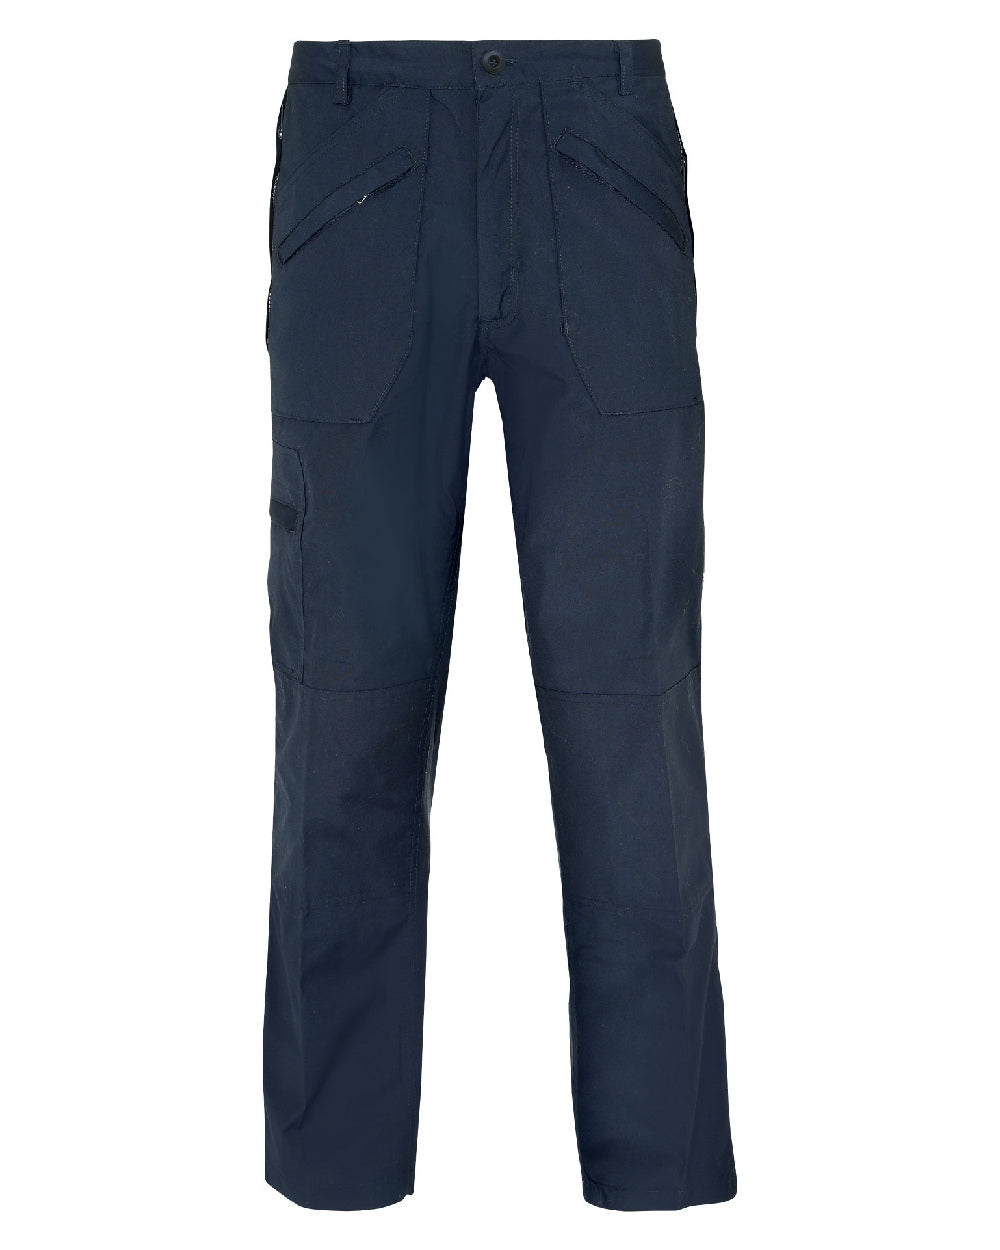 Champion Wenlock Multi Pocket Activity Trousers in Navy 